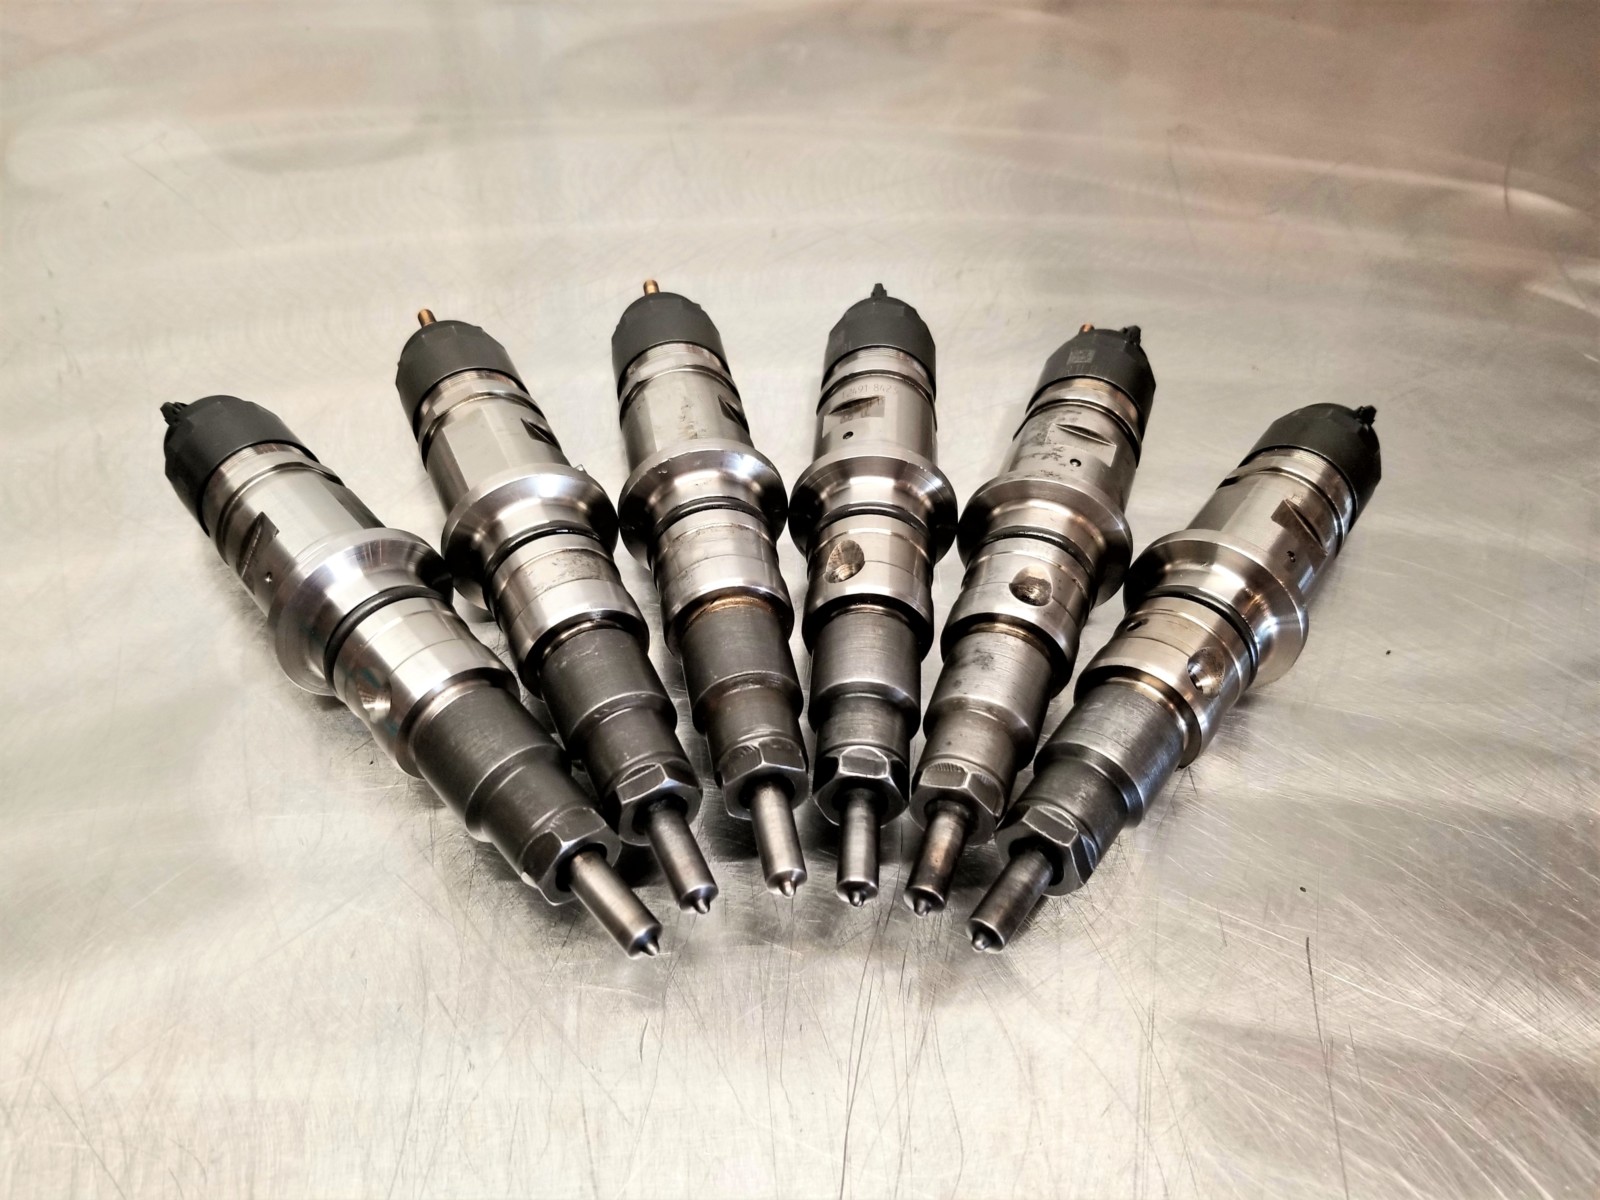 6.7 Cummins – Rebuildable Injector Cores – 1 Set of 6 – Years 2007-12 Do 6.7 Cummins Injectors Need To Be Programmed